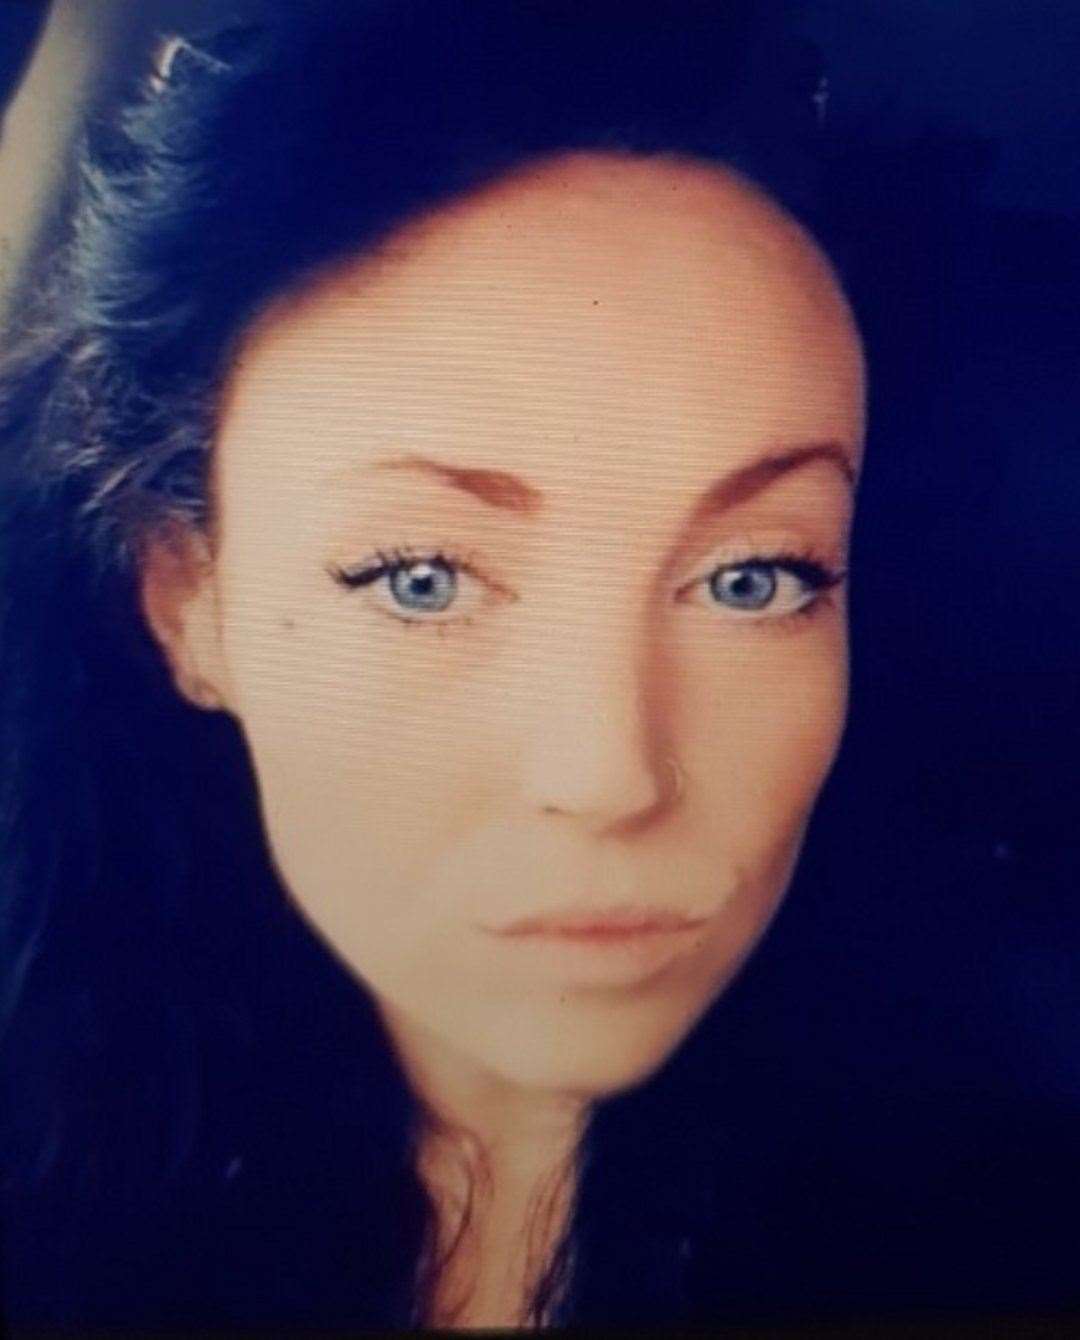 Leah Ware had been missing since last May